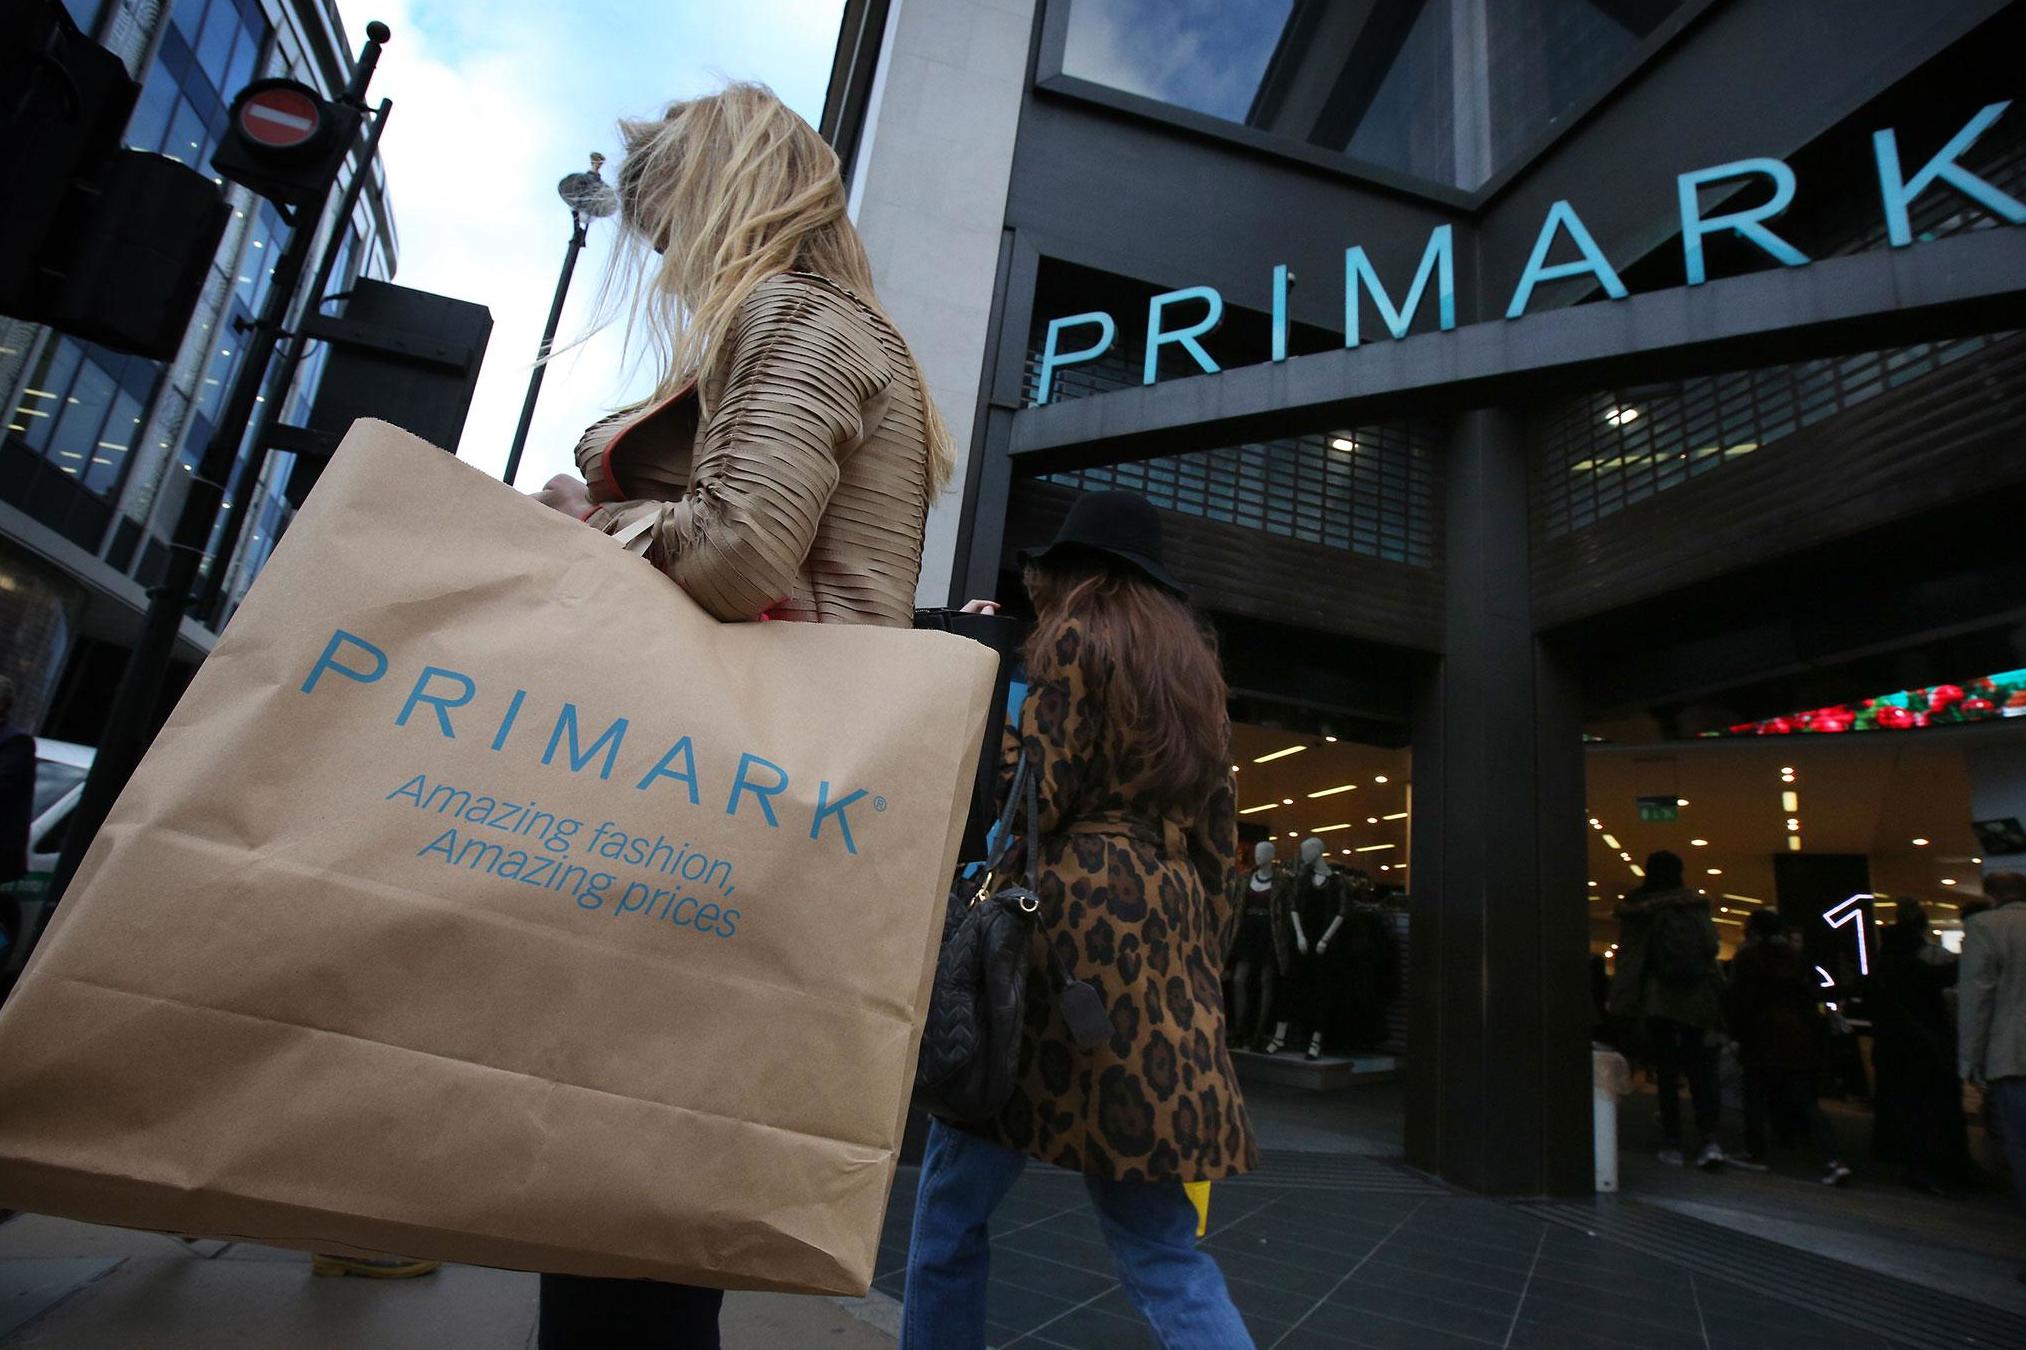 Primark's growth is accelerating